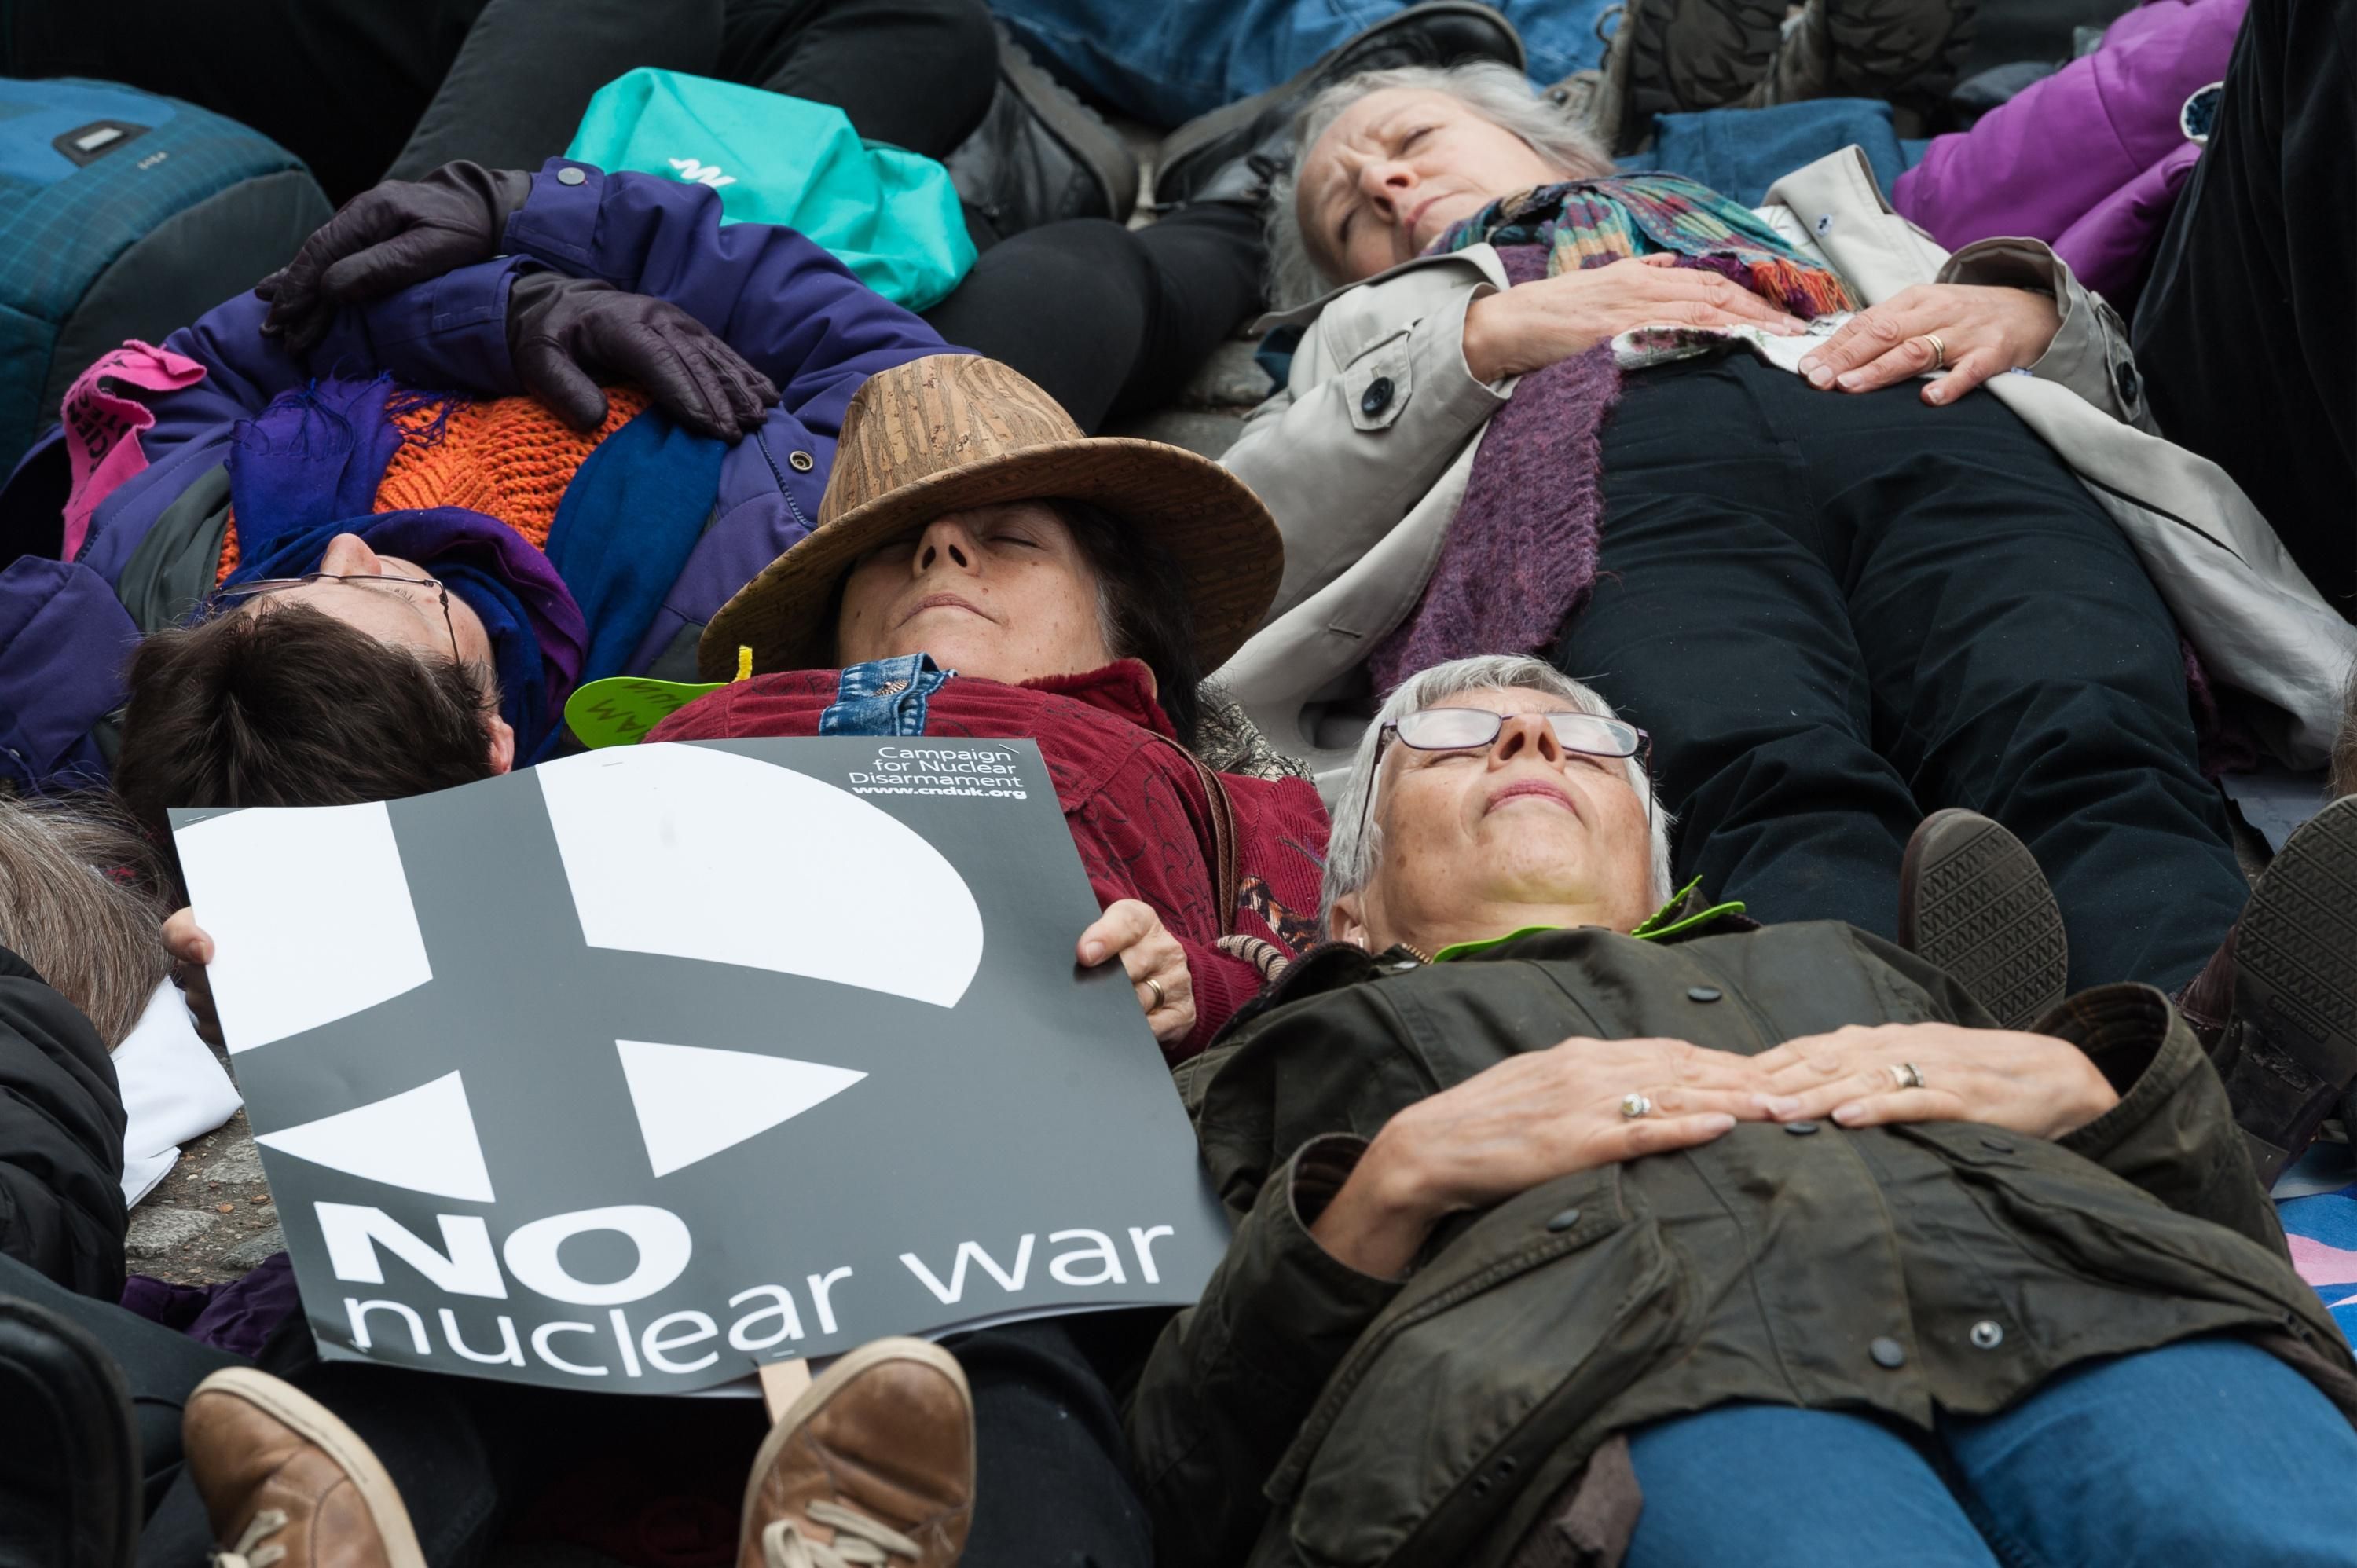 Anti-nuclear war die-in protest